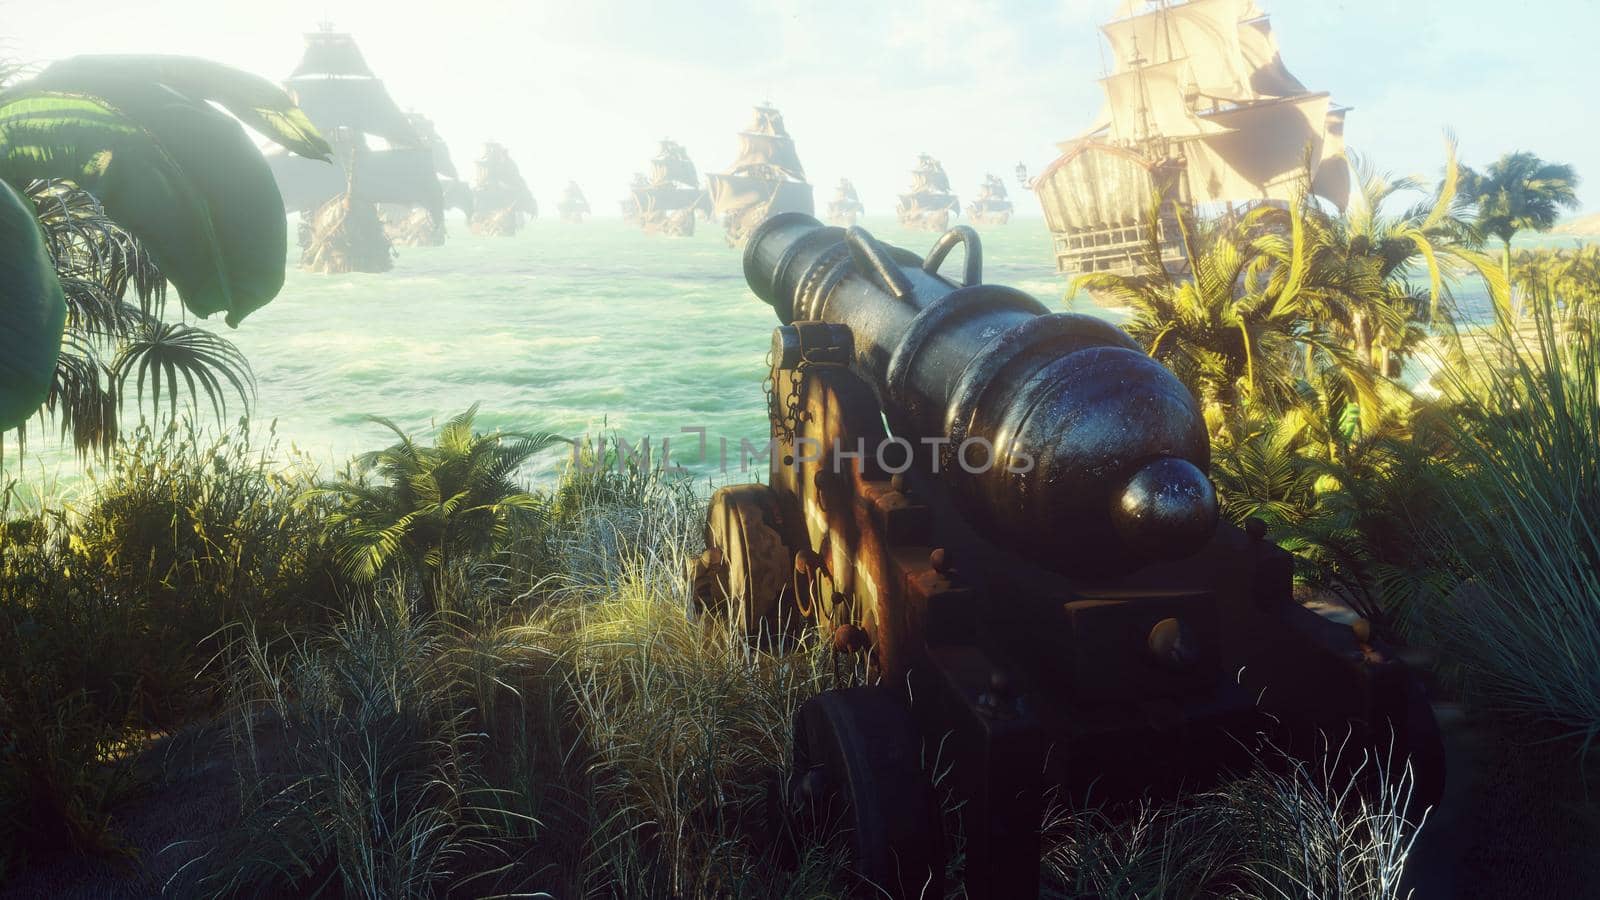 The medieval cannon is ready for battle against the ship's fleet. A cannon in the middle of green grass on an island, on a Sunny morning. 3D Rendering. by designprojects